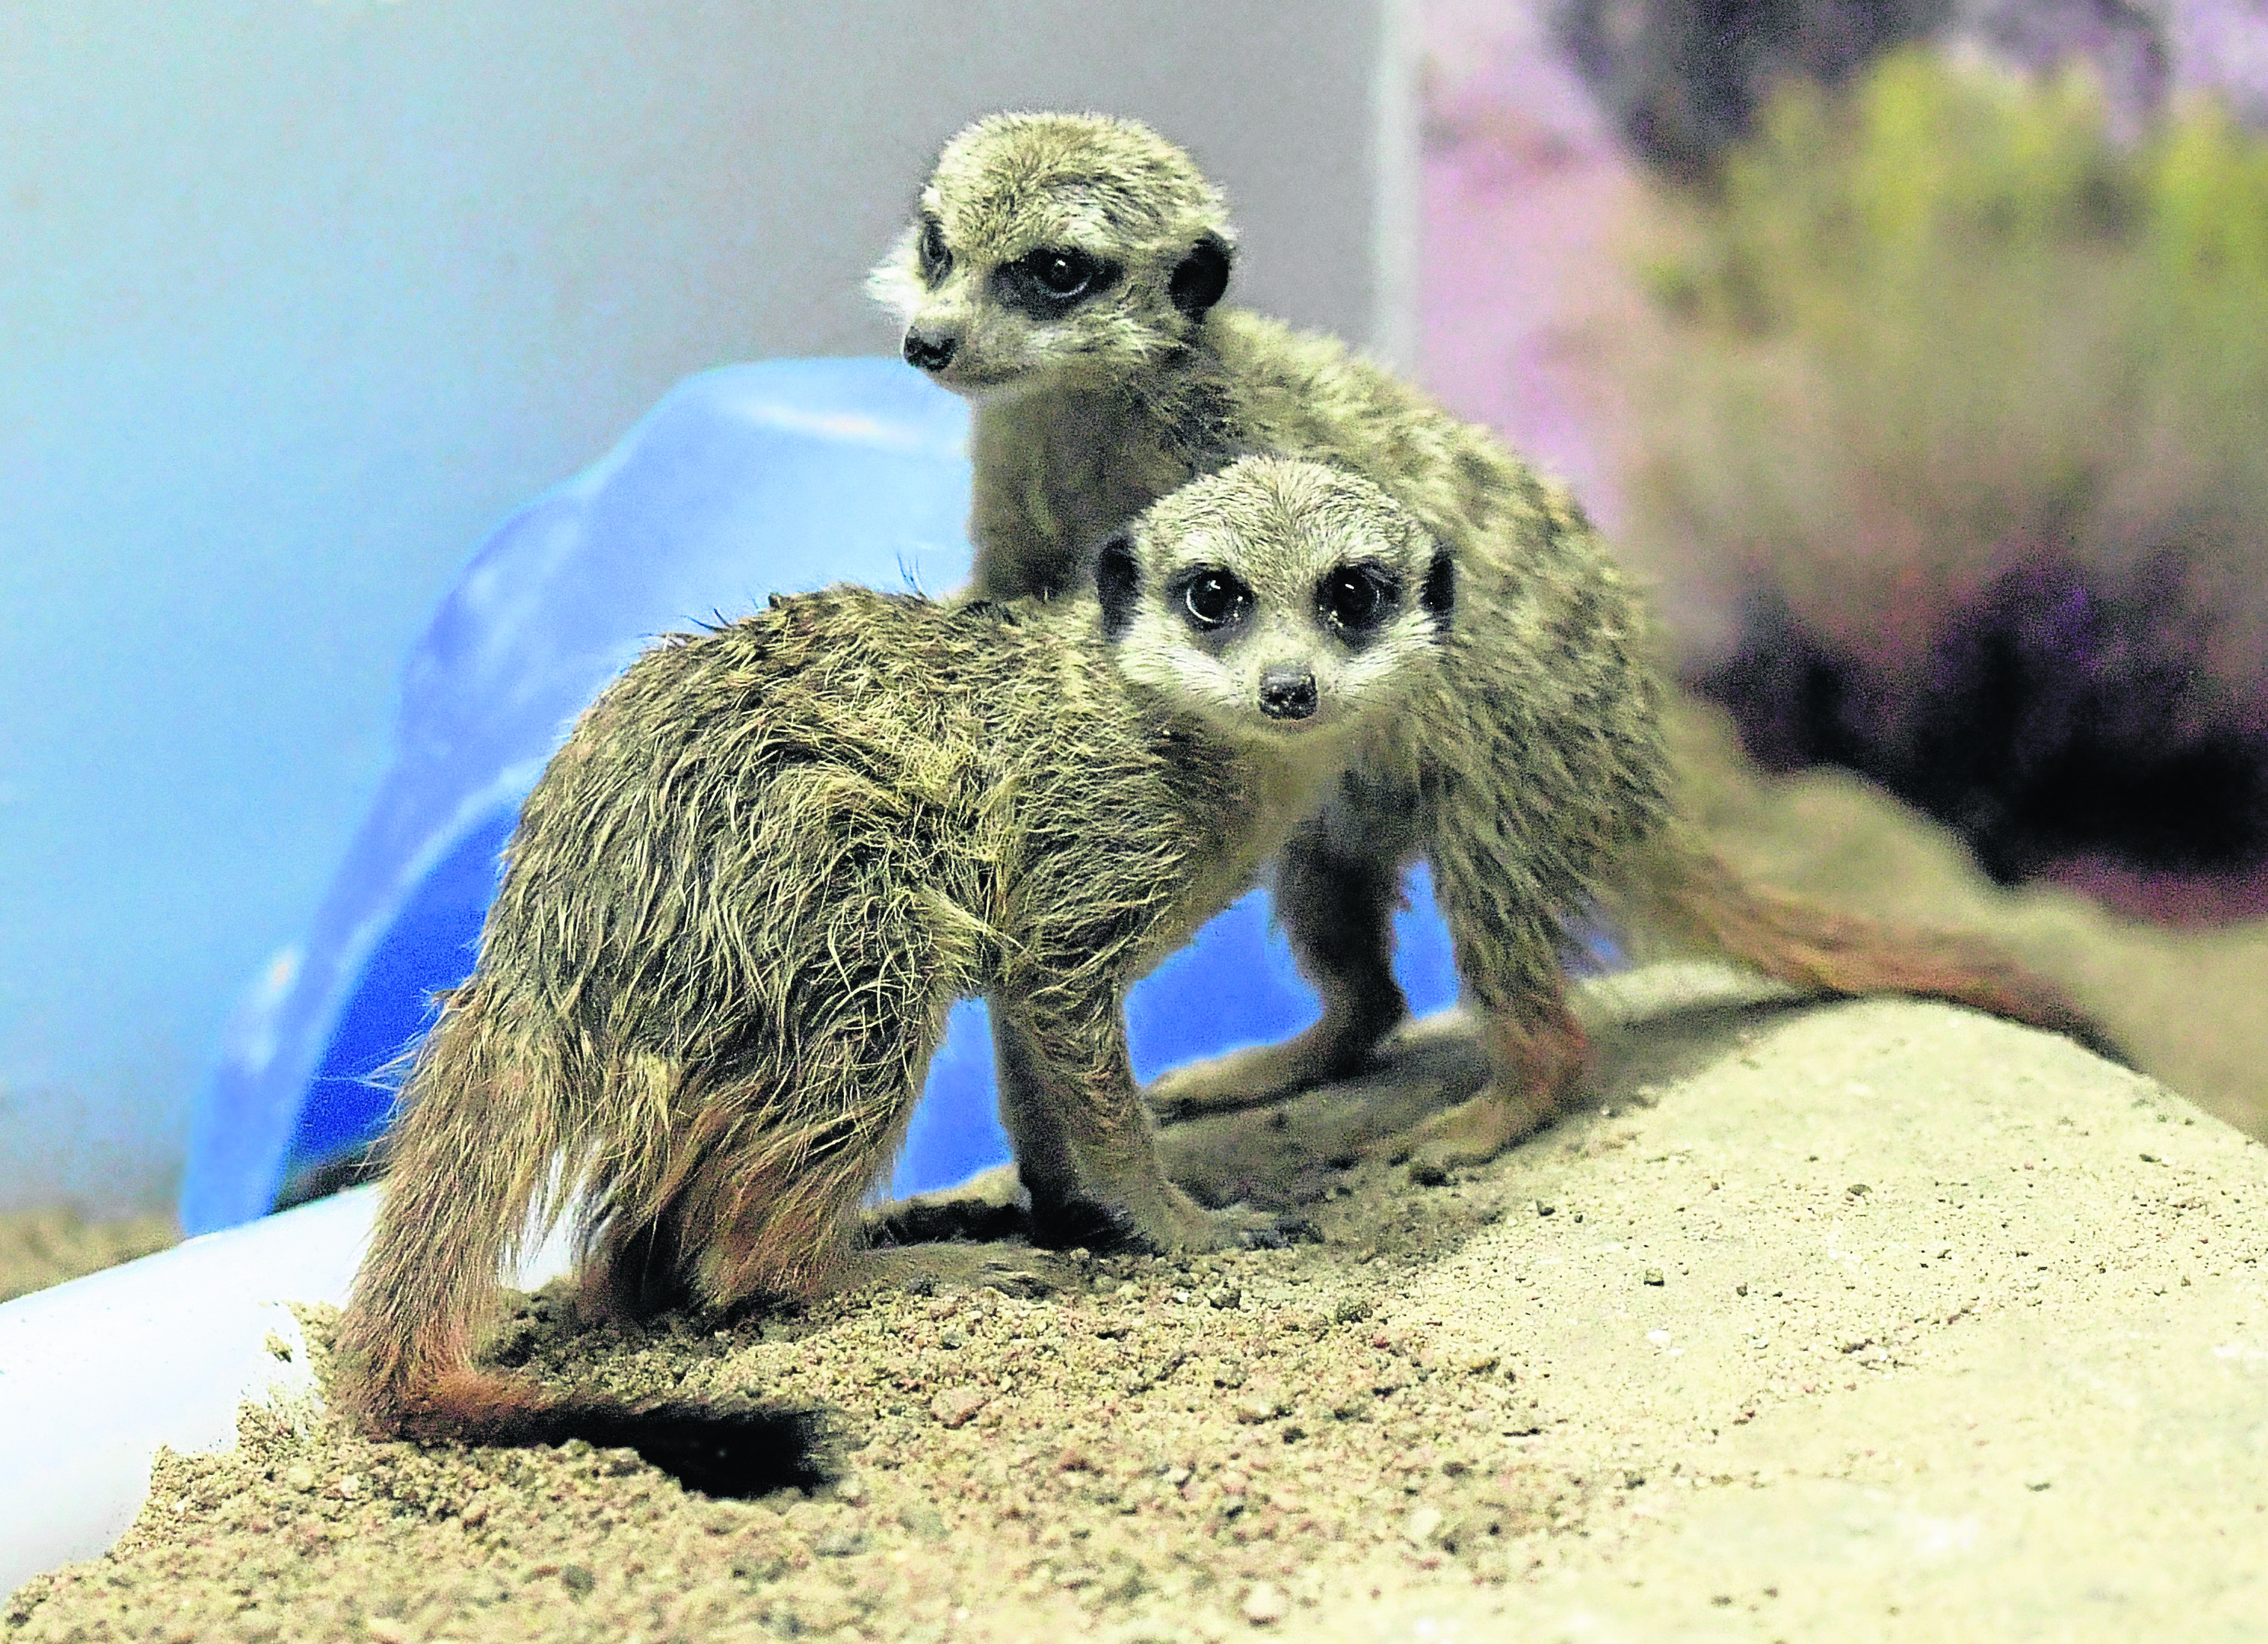 Meerkats Dee and Don were "hugely popular" at the Hazlehead Park attraction.